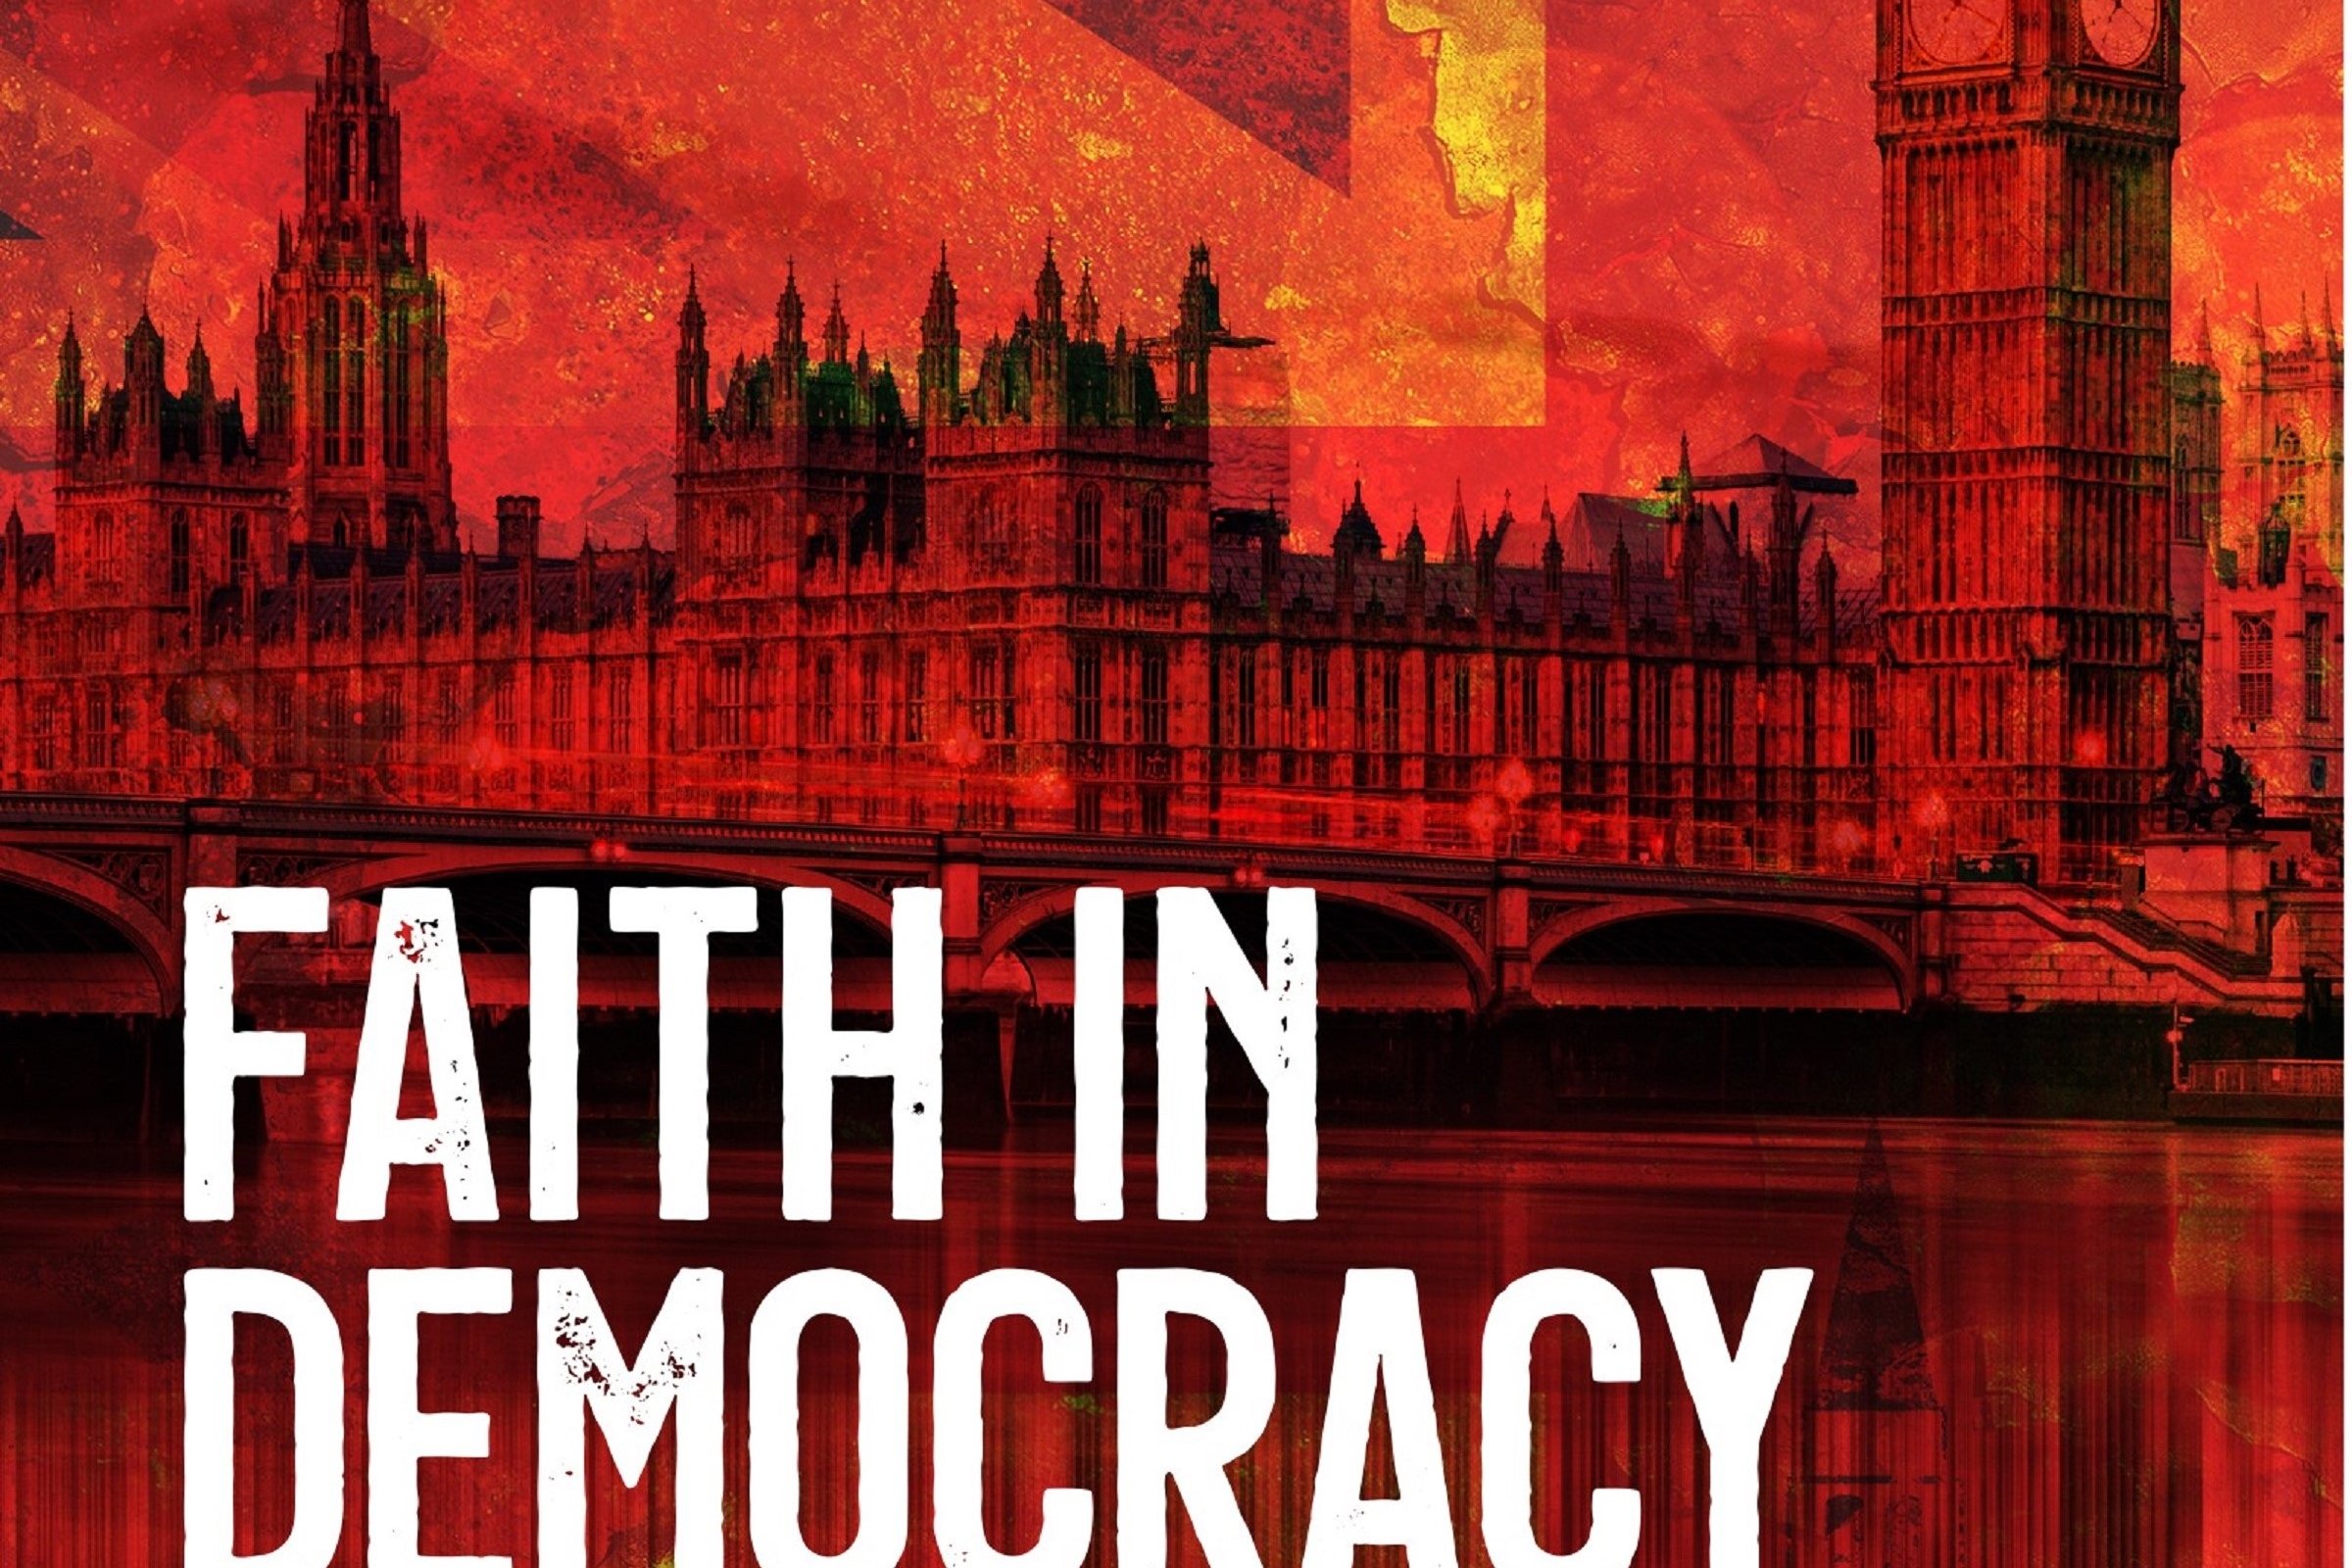 Democracy is much more than ‘the will of the people’